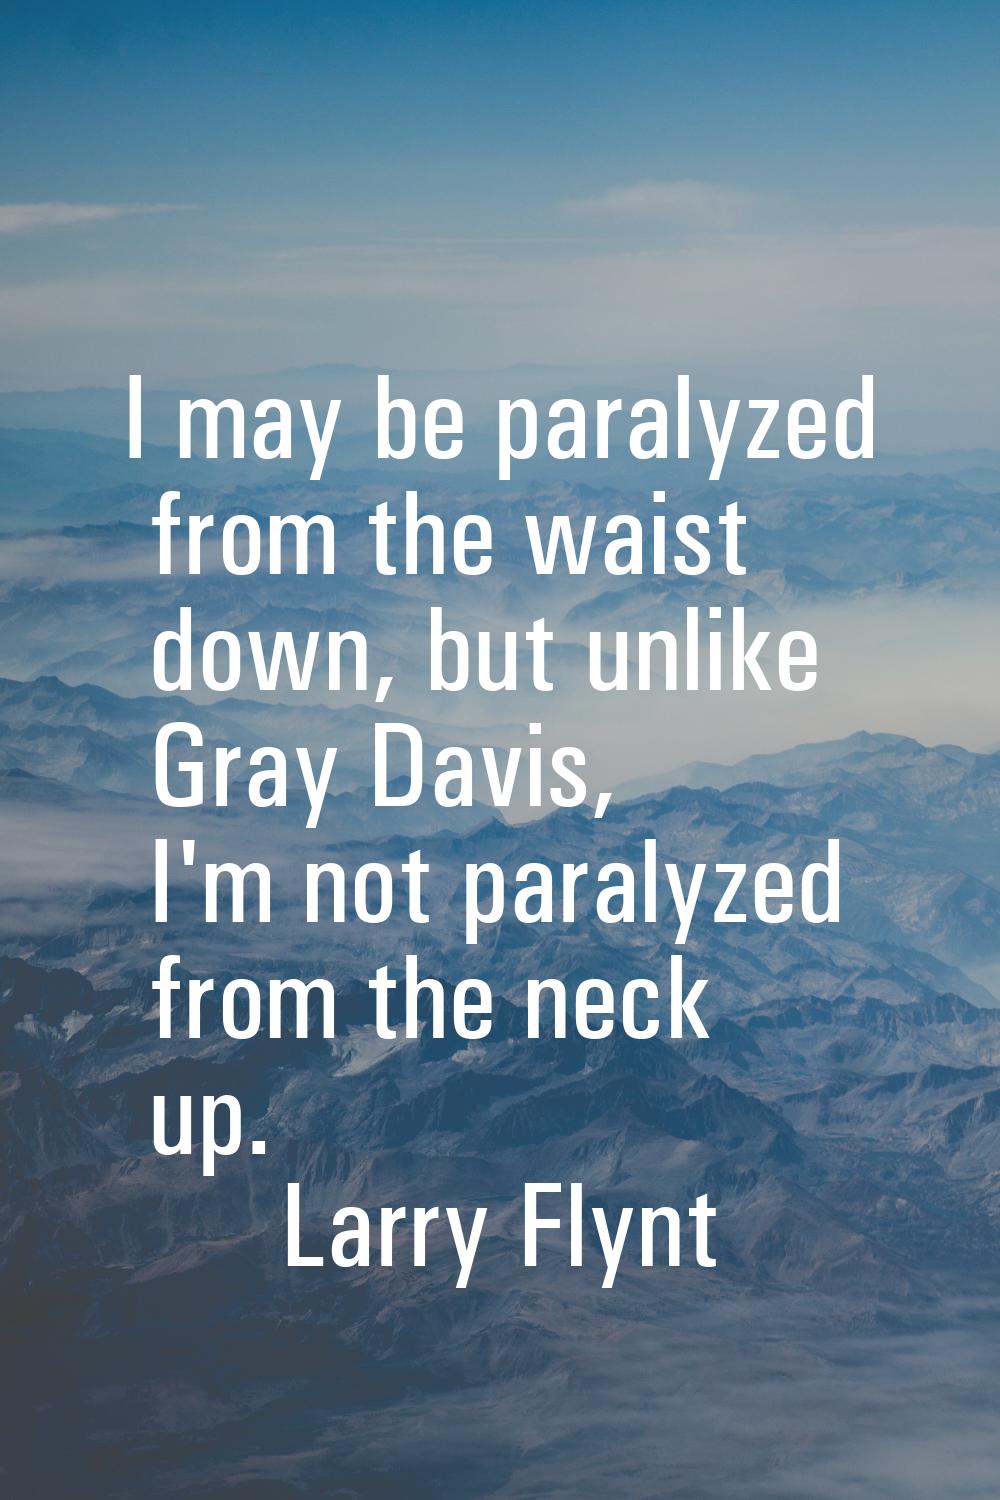 I may be paralyzed from the waist down, but unlike Gray Davis, I'm not paralyzed from the neck up.